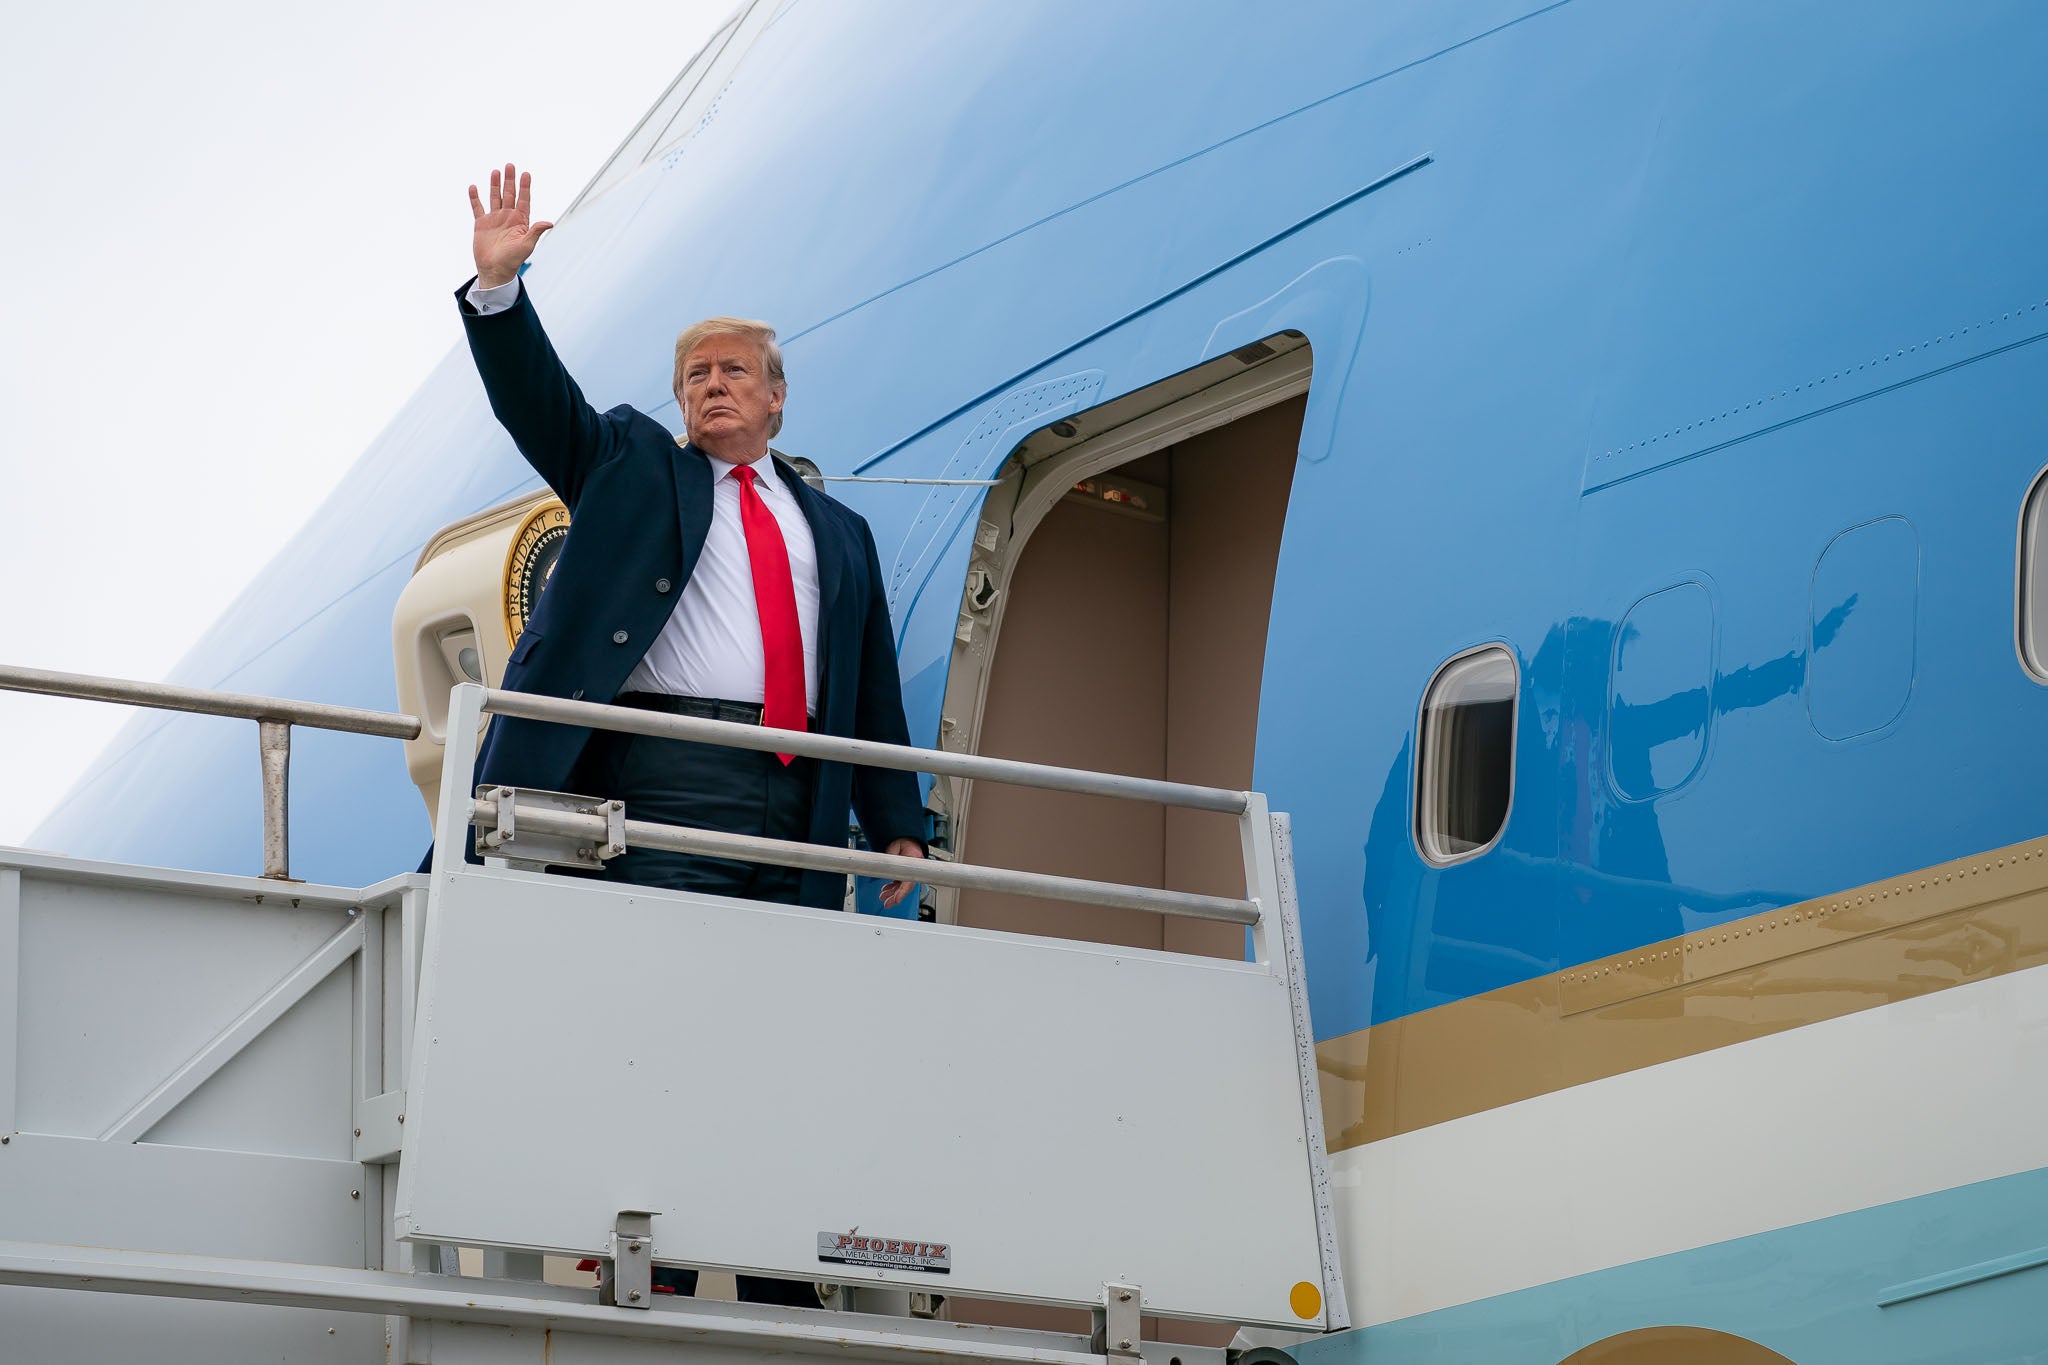 President Donald Trump boards Air Force One at Louis Armstrong New Orleans International Airport in Kenner, Louisiana on January 14, 2018.